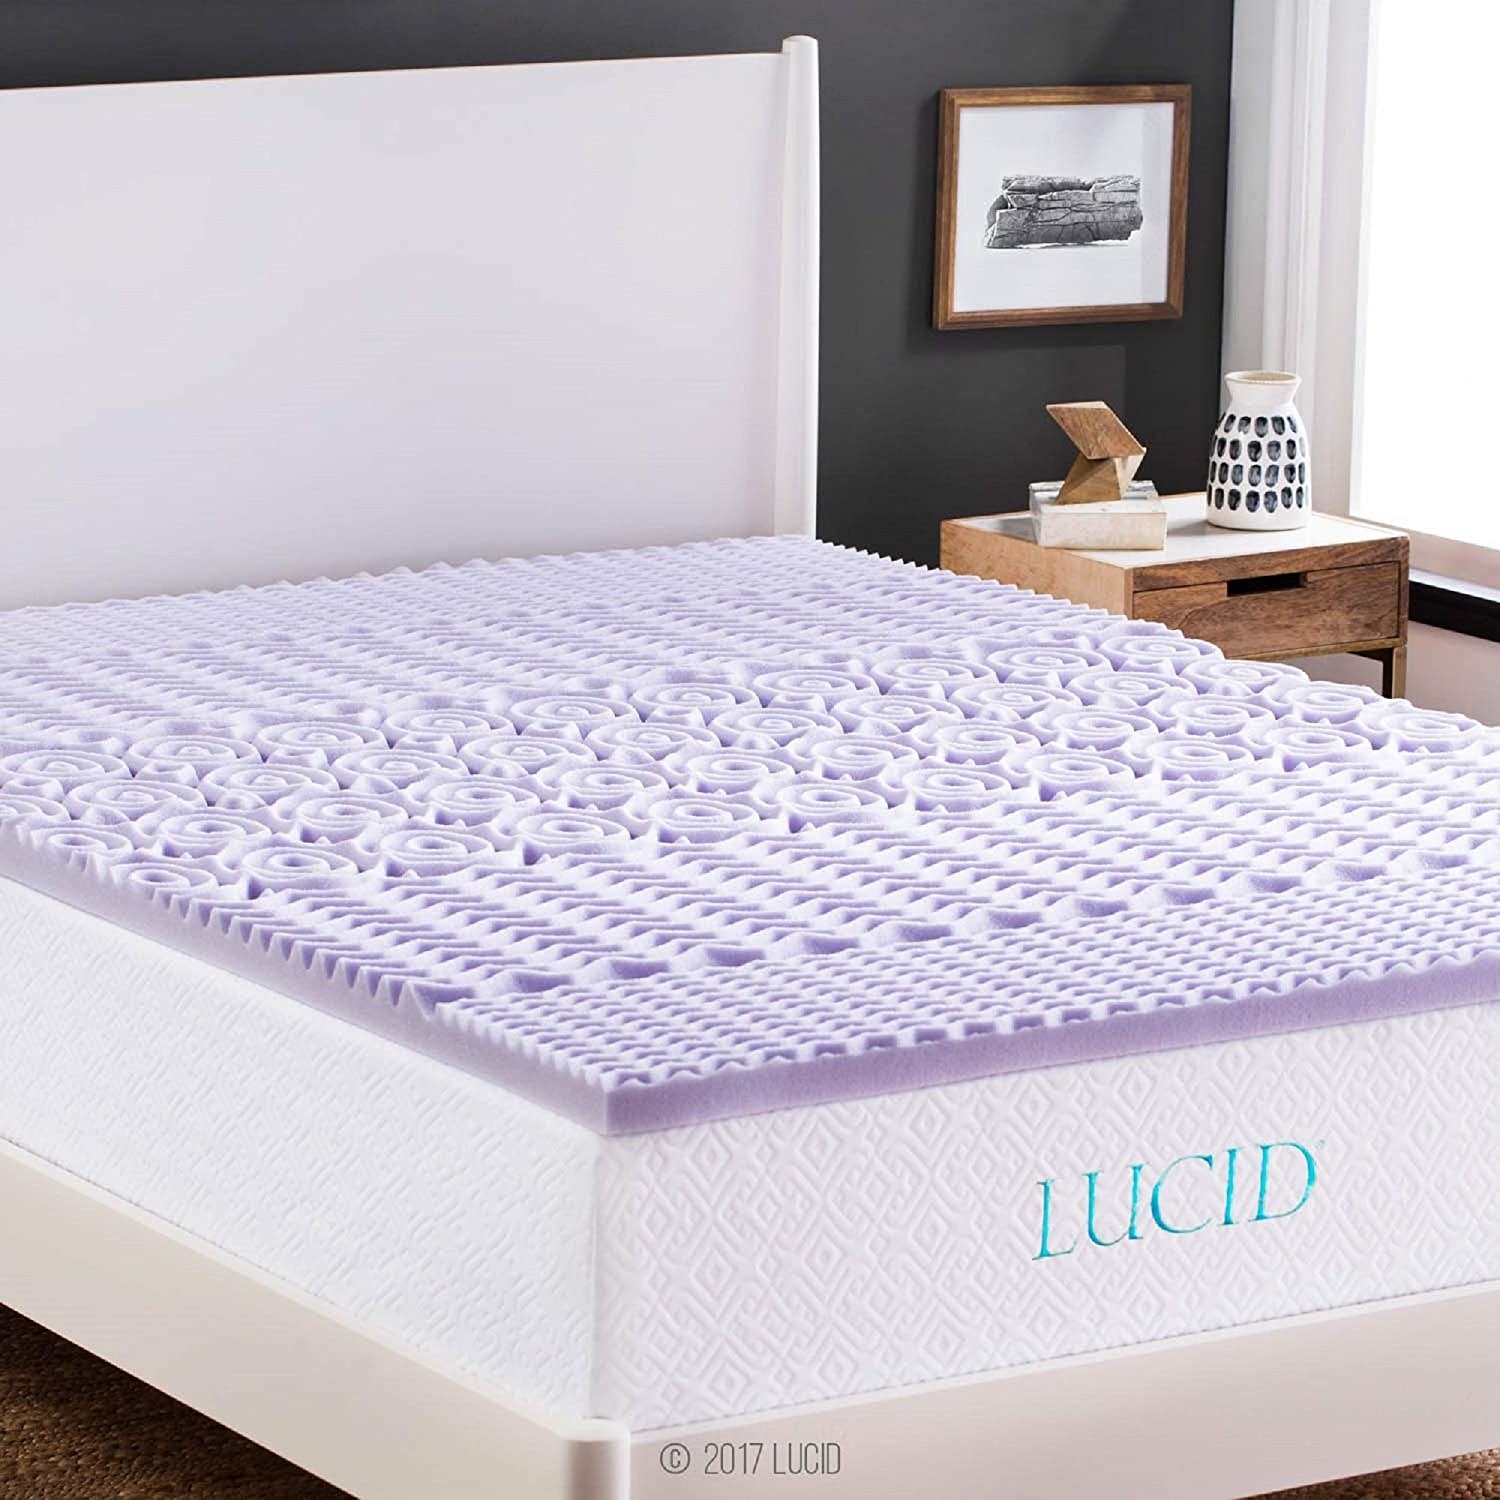 Details about   2''/3''/4'' Memory Foam Mattress Topper Ventilated Topper with Free Tencel Cover 